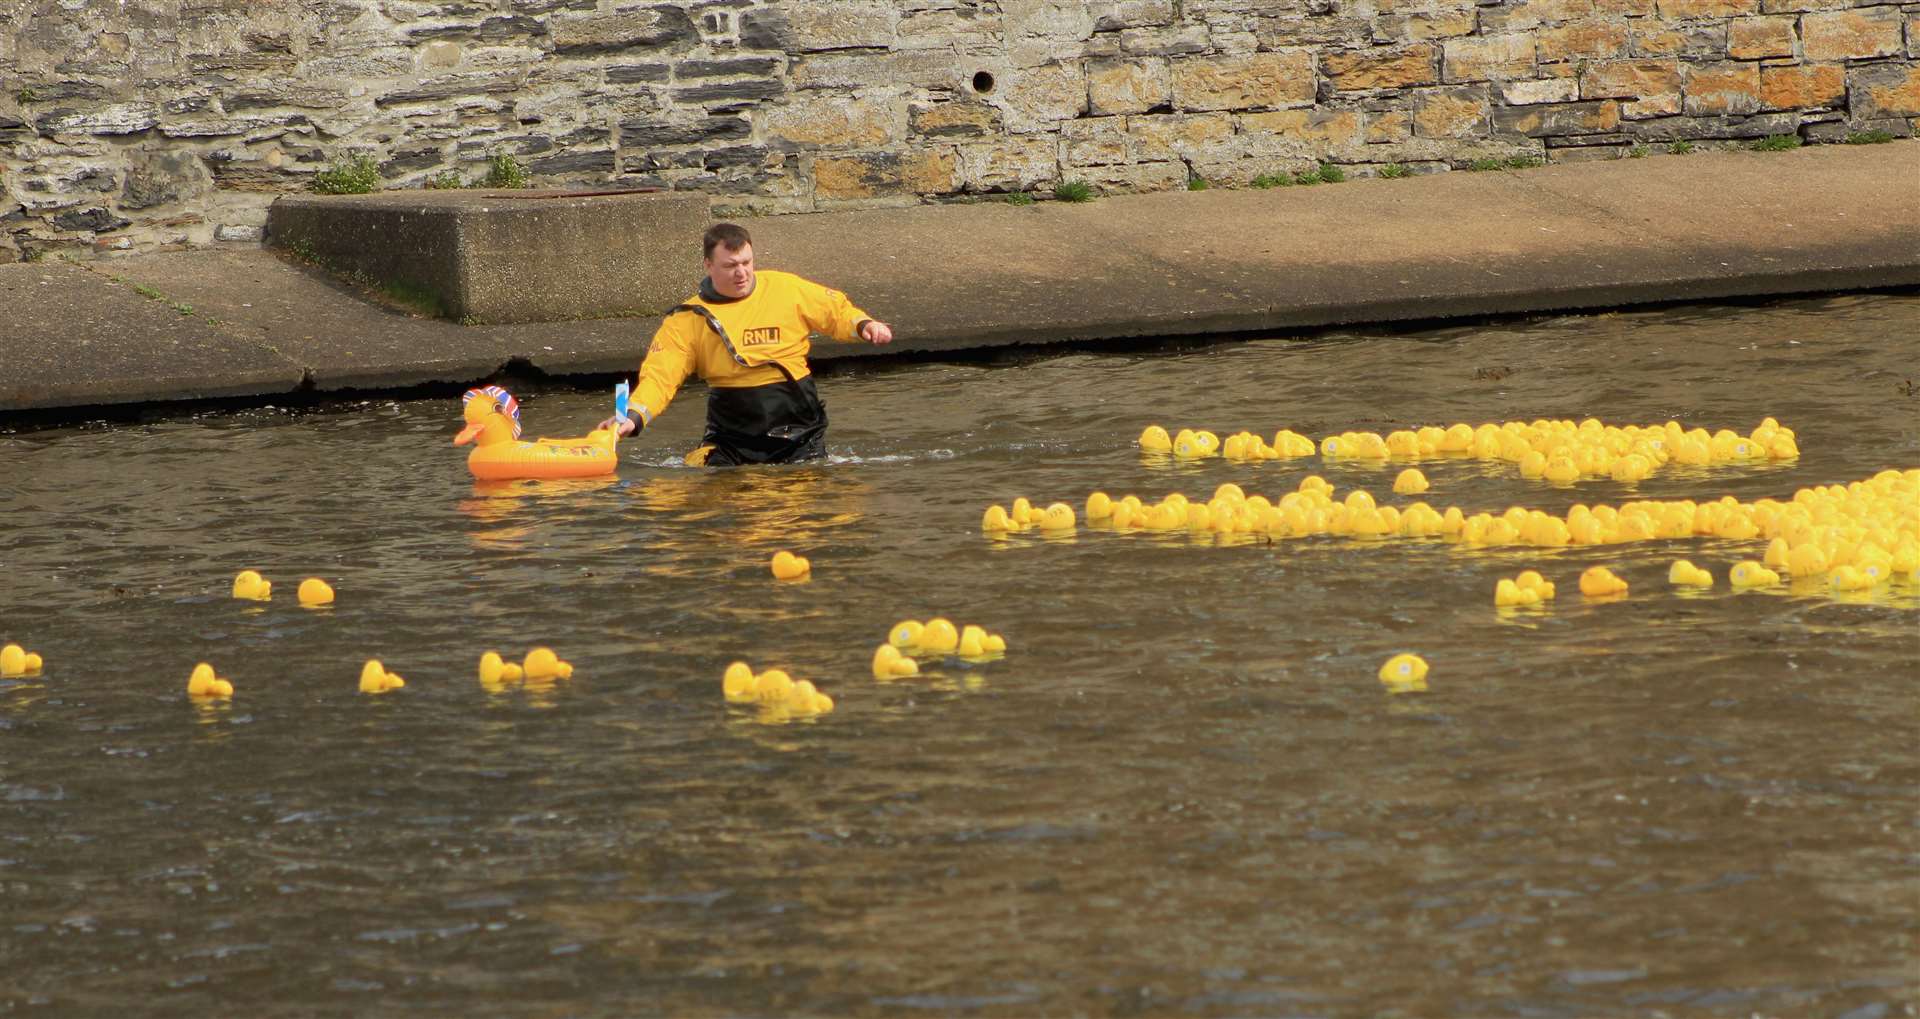 Hundreds of ducks were let loose in Wick River as part of Sunday's RNLI fundraising event. Picture: Alan Hendry